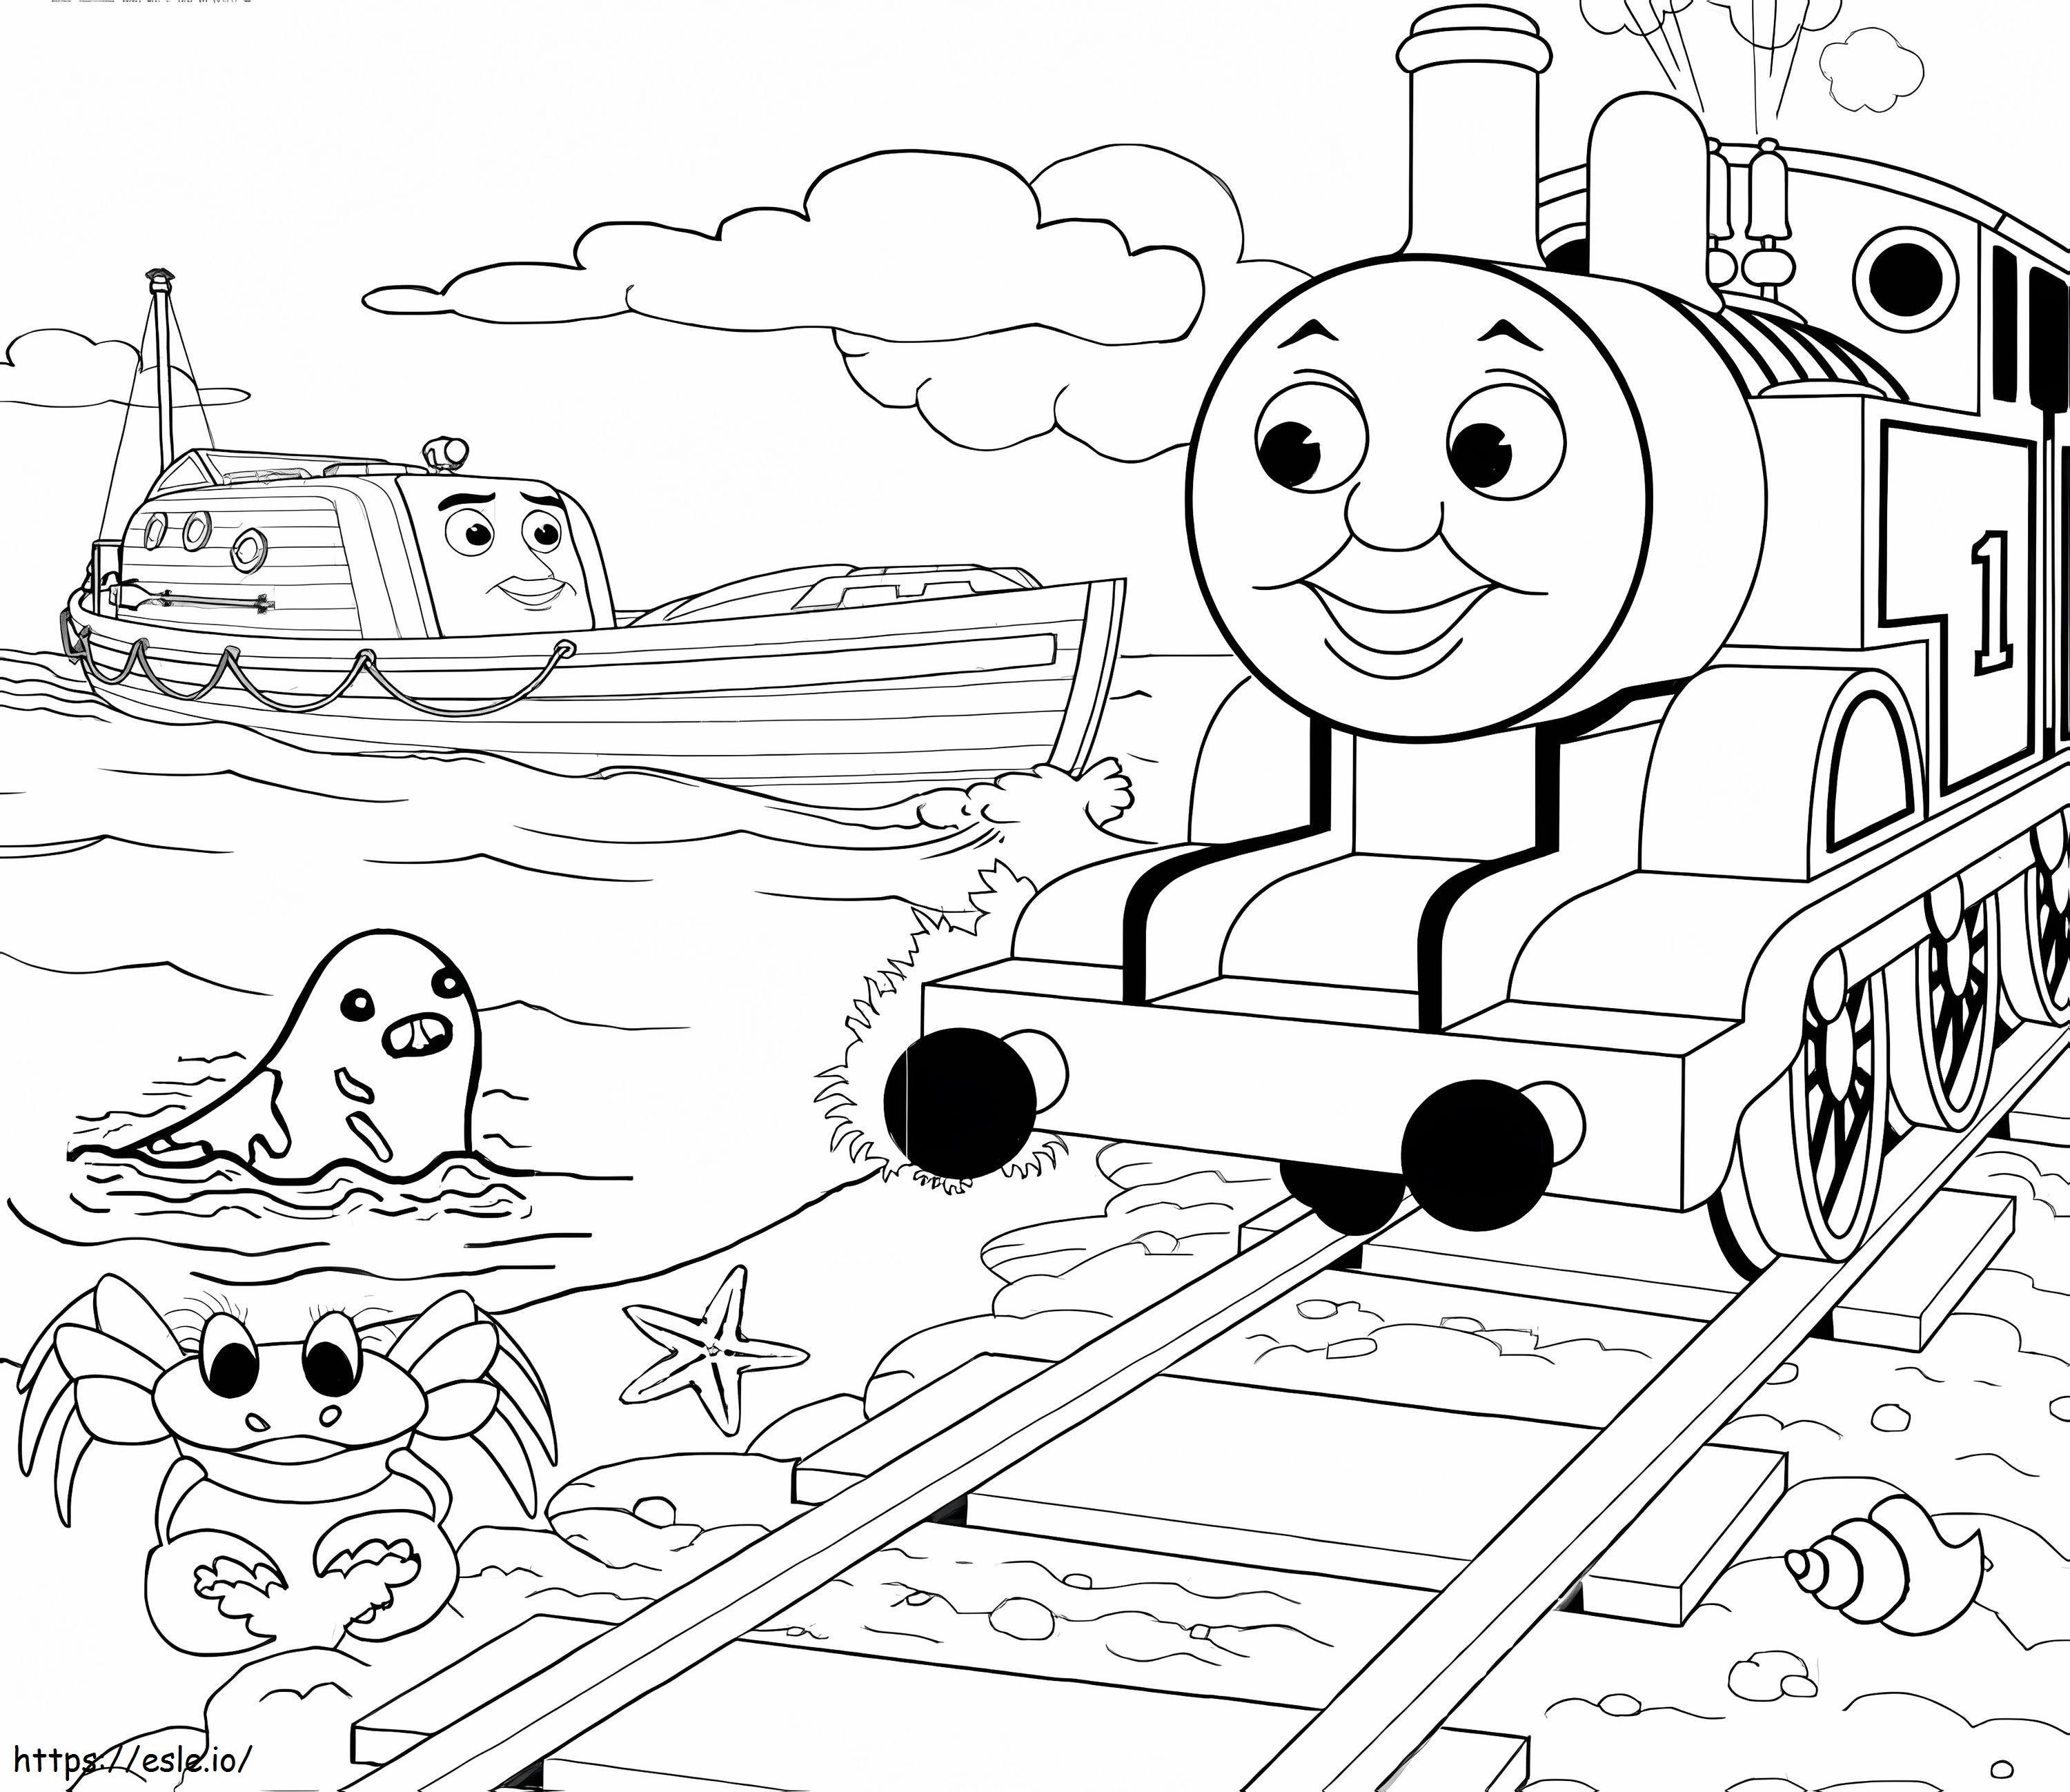 Thomas The Train Coloring Page 13 coloring page